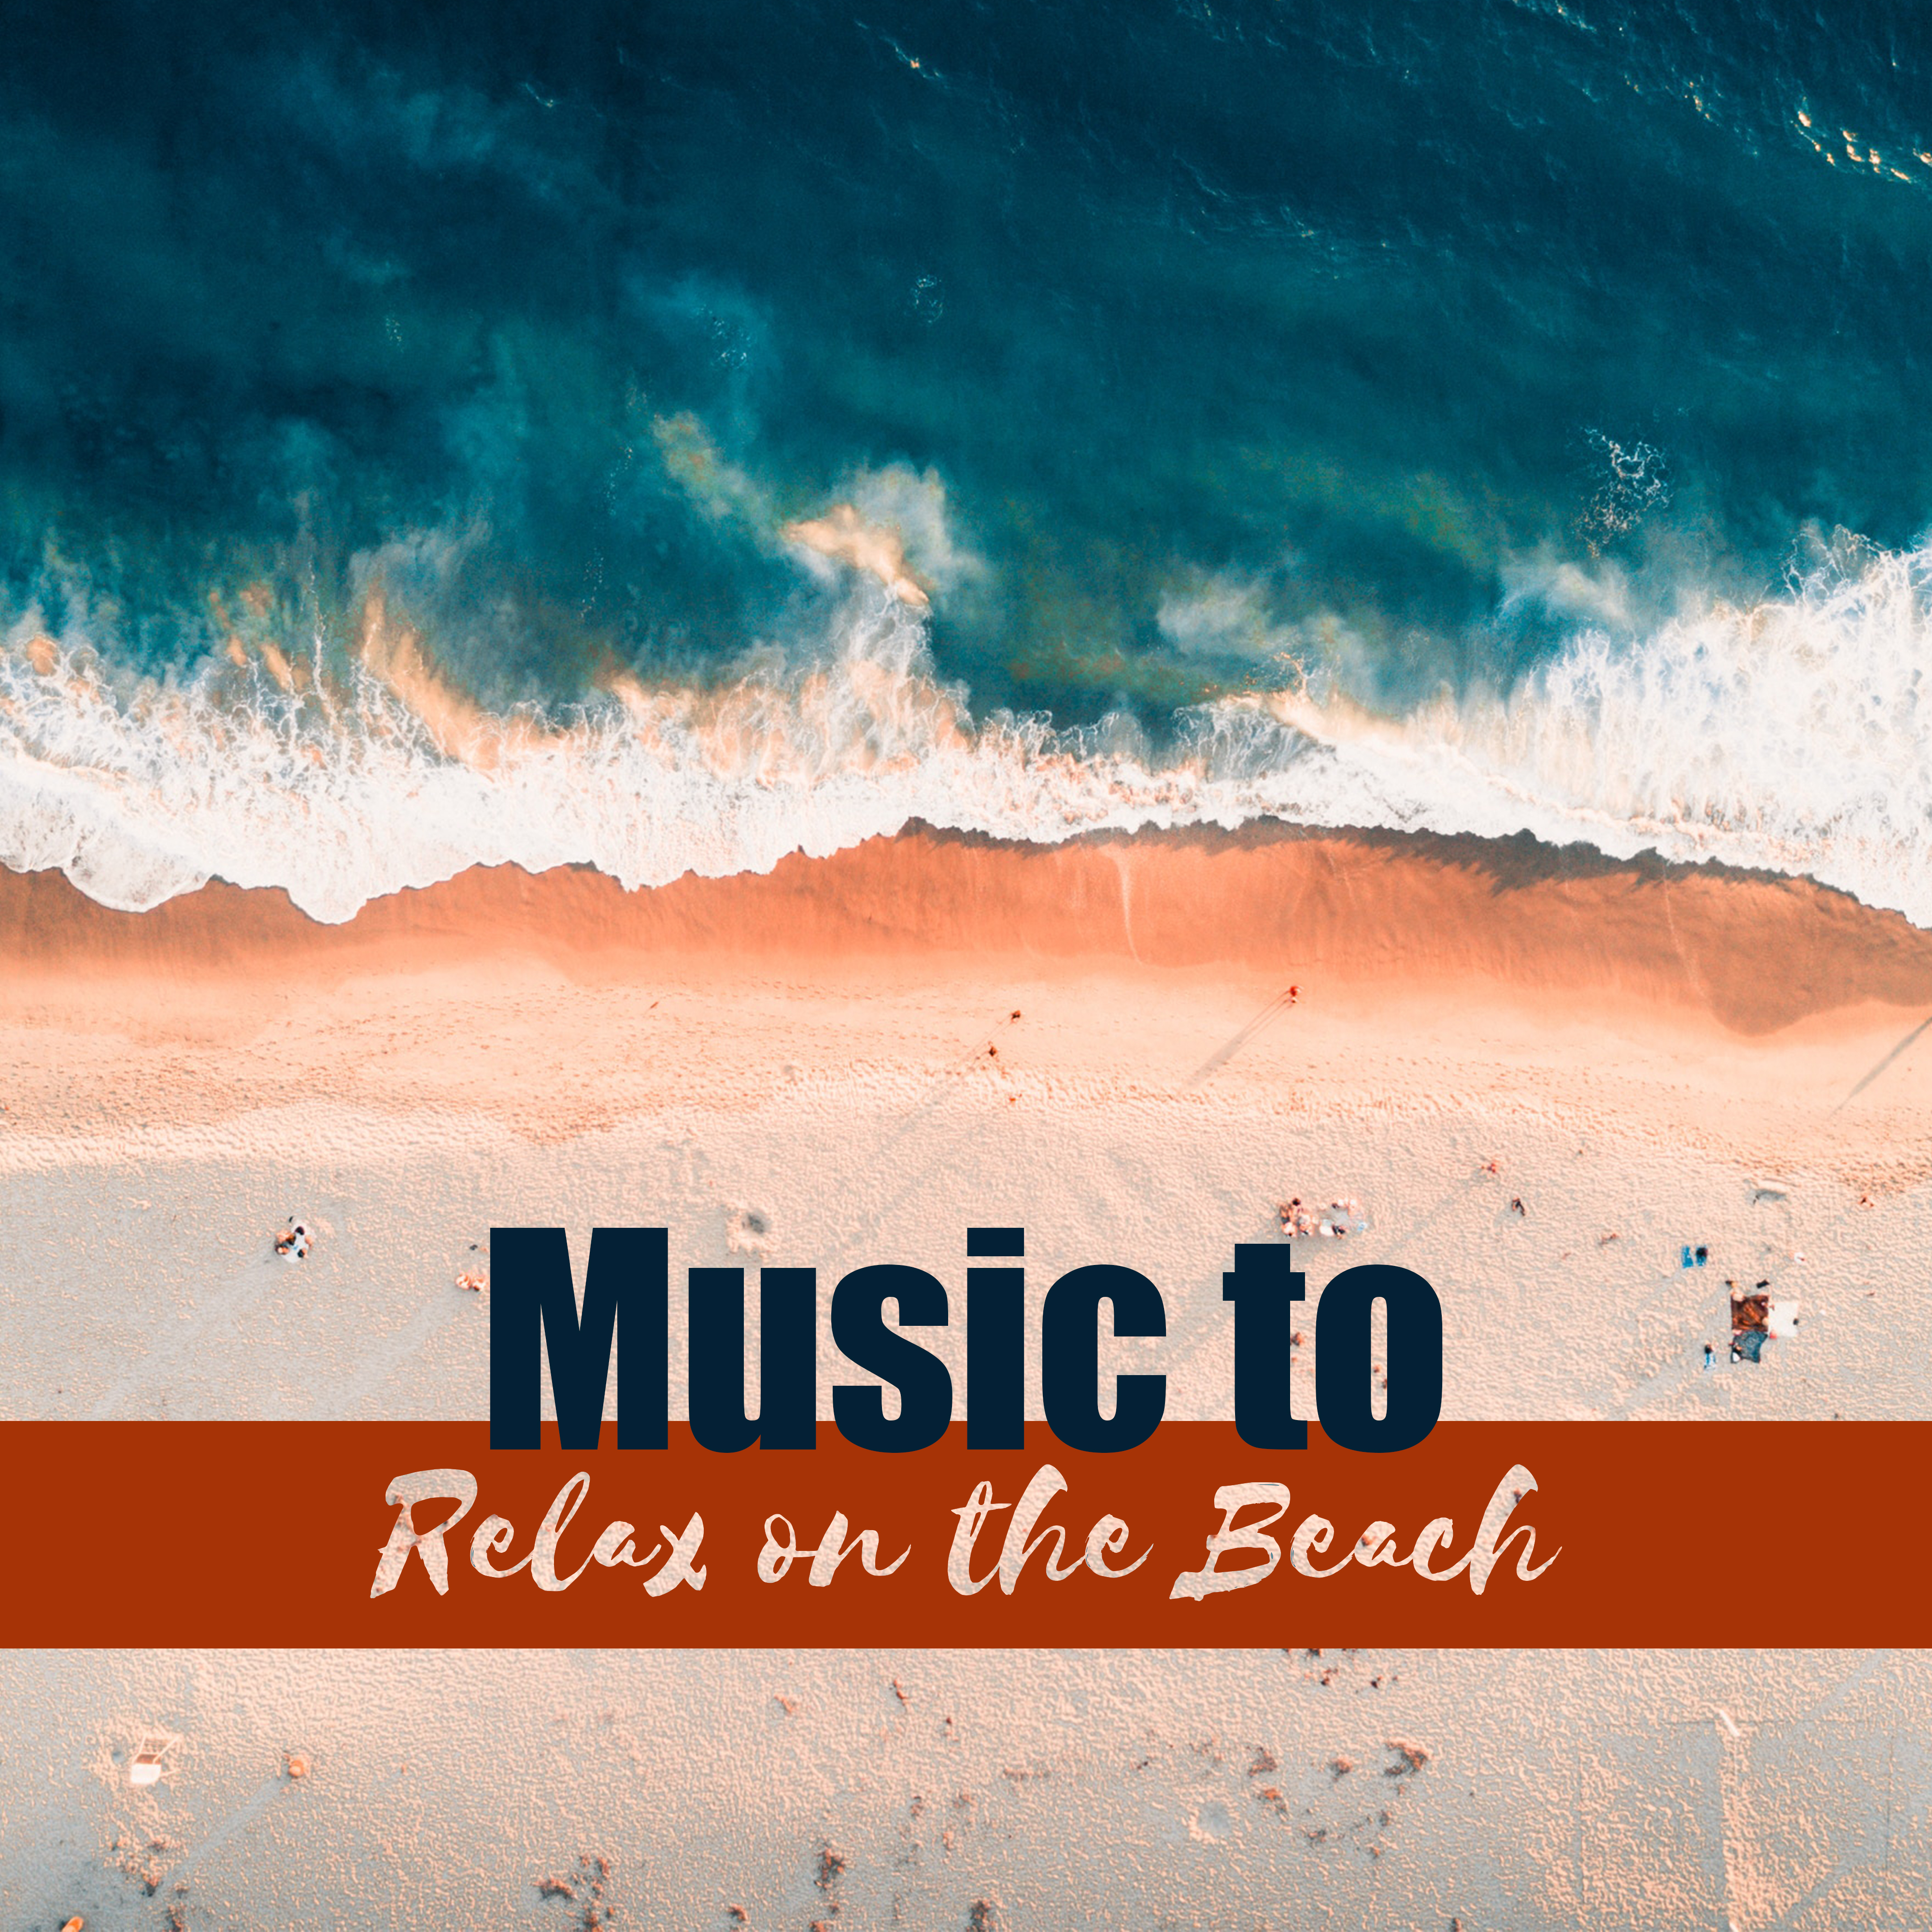 Music to Relax on the Beach